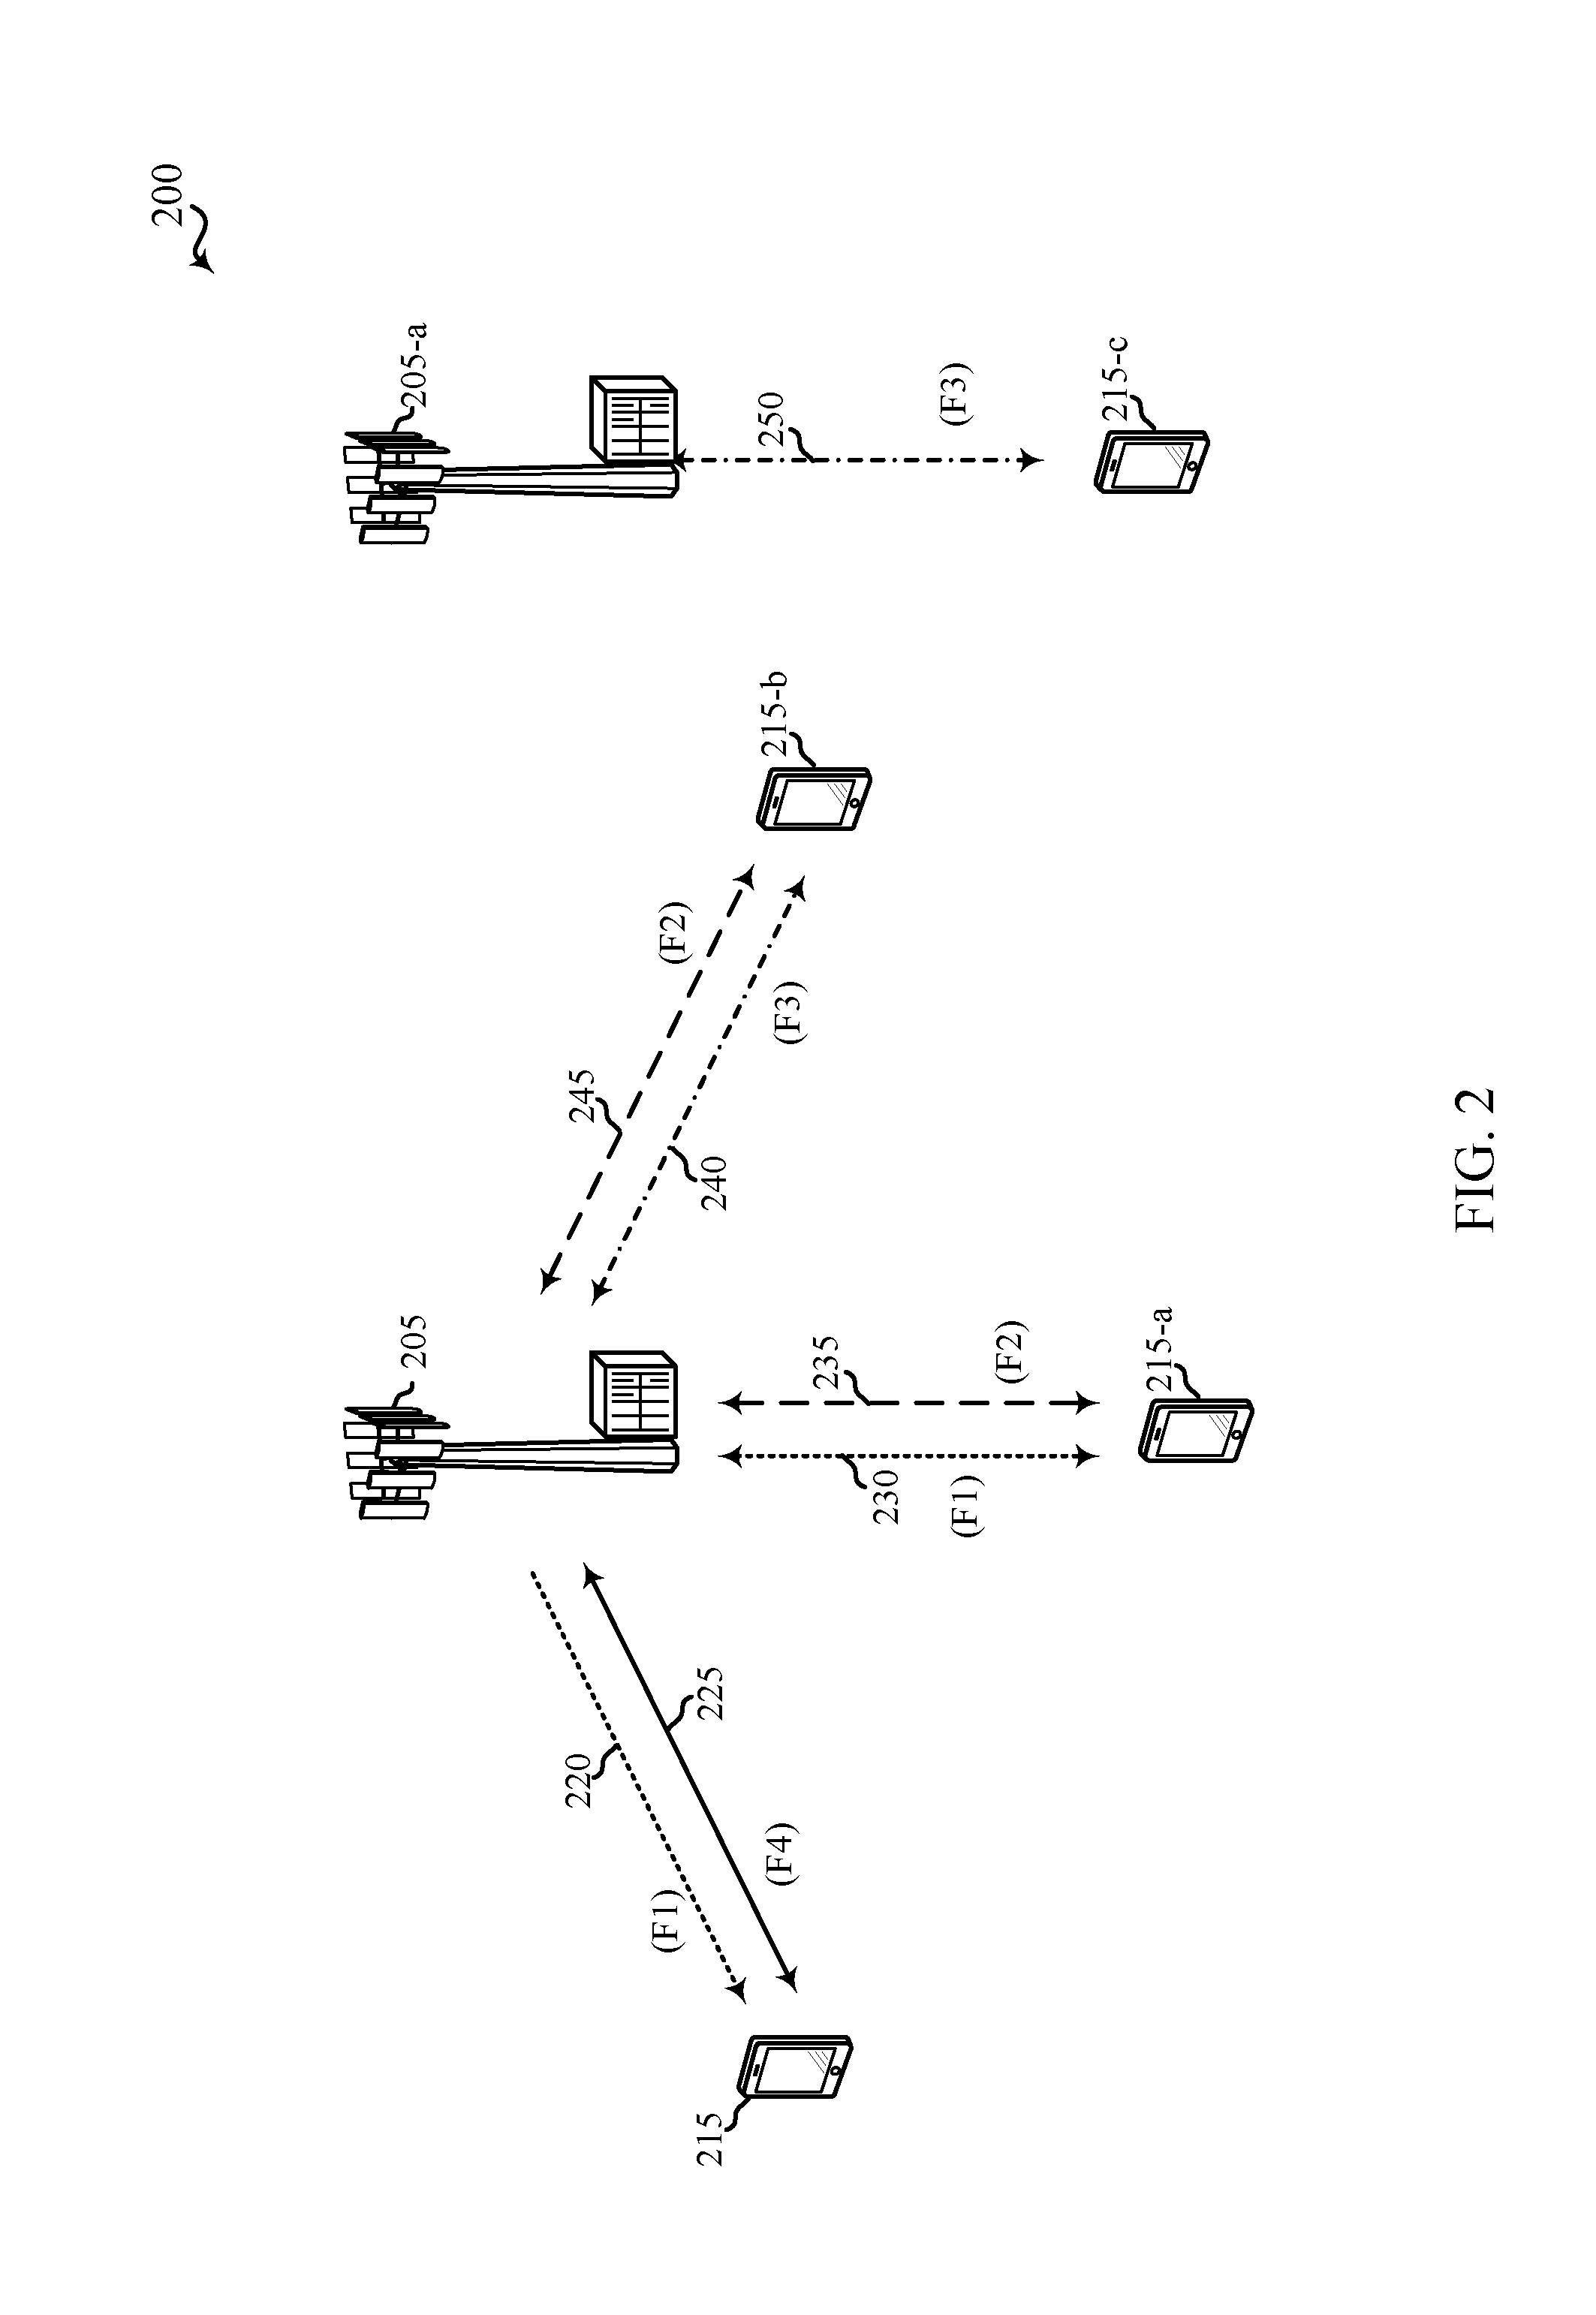 Techniques for reserving a channel of a radio frequency spectrum